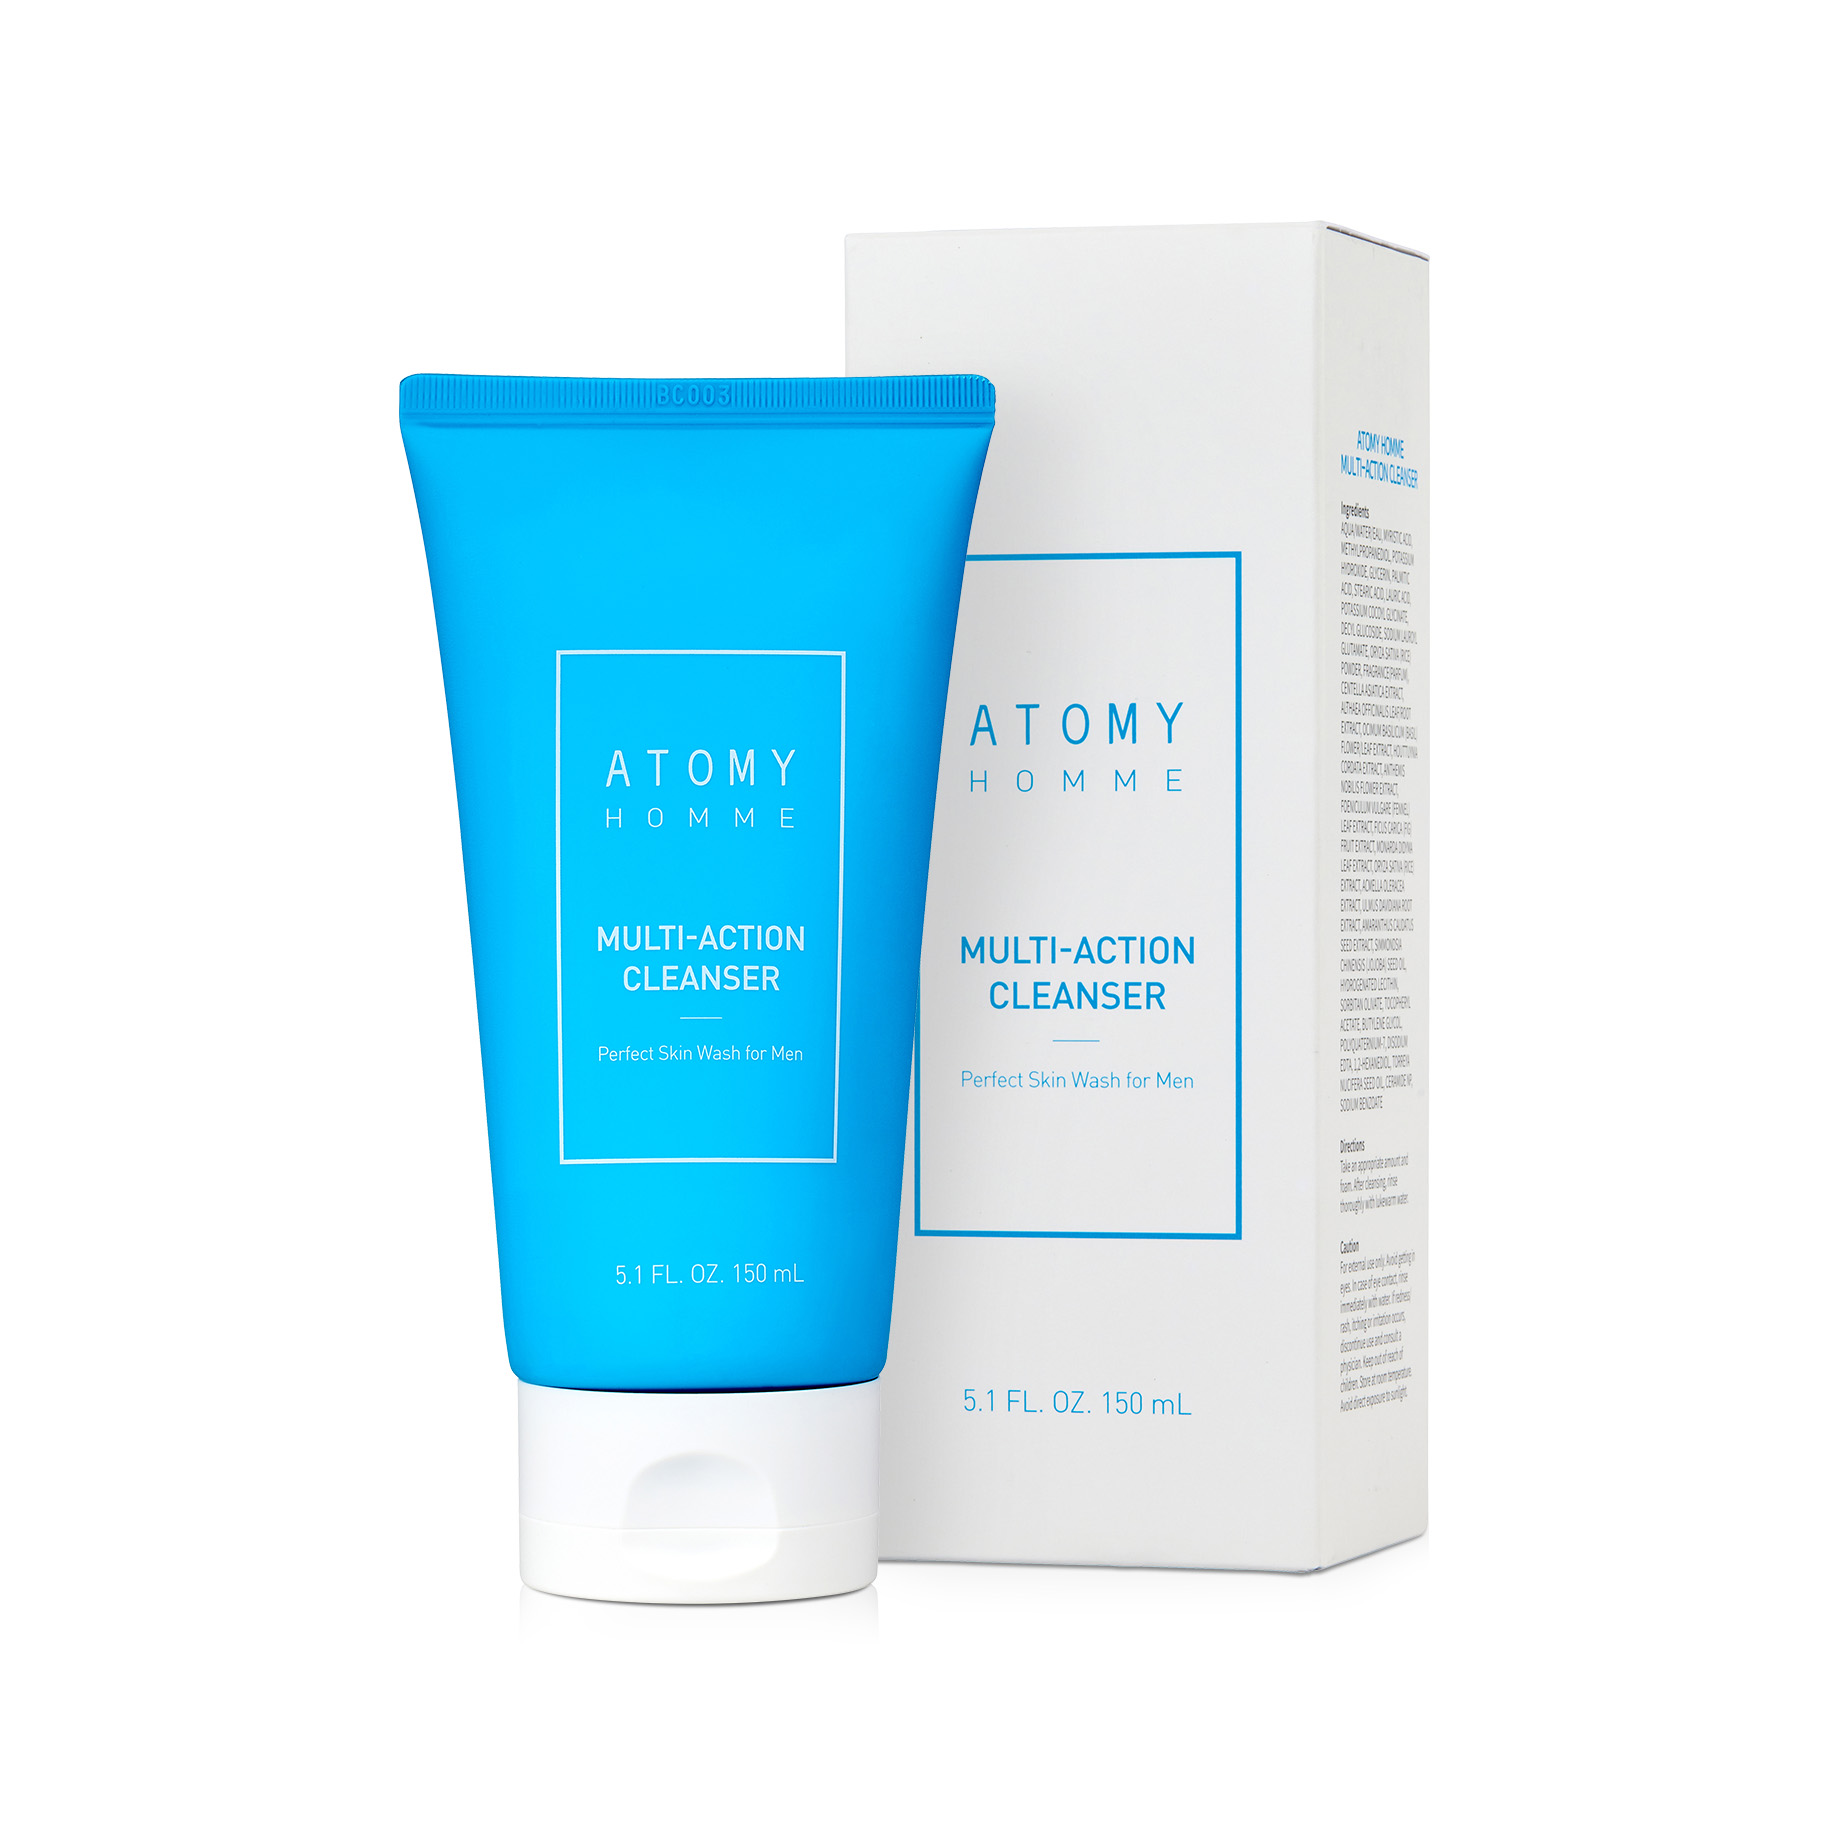 Atomy Homme Multi-Action Cleanser | Atomy Colombia